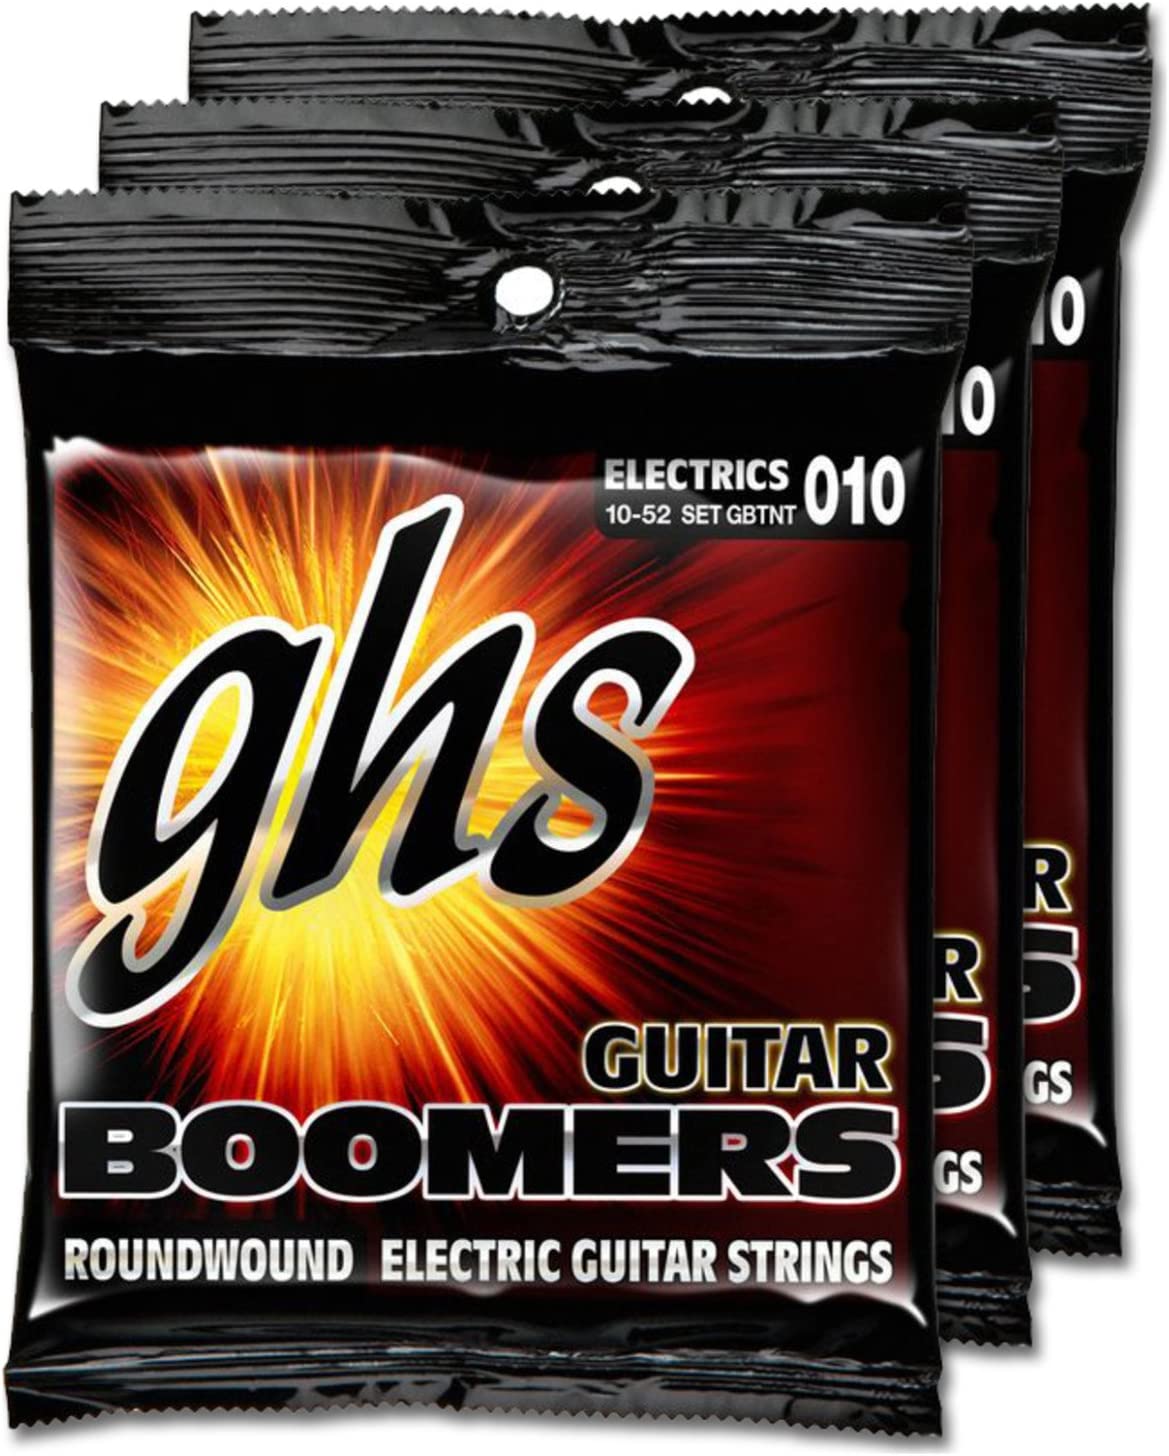 GHS Boomer TNT Electric Guitar Strings on a white background